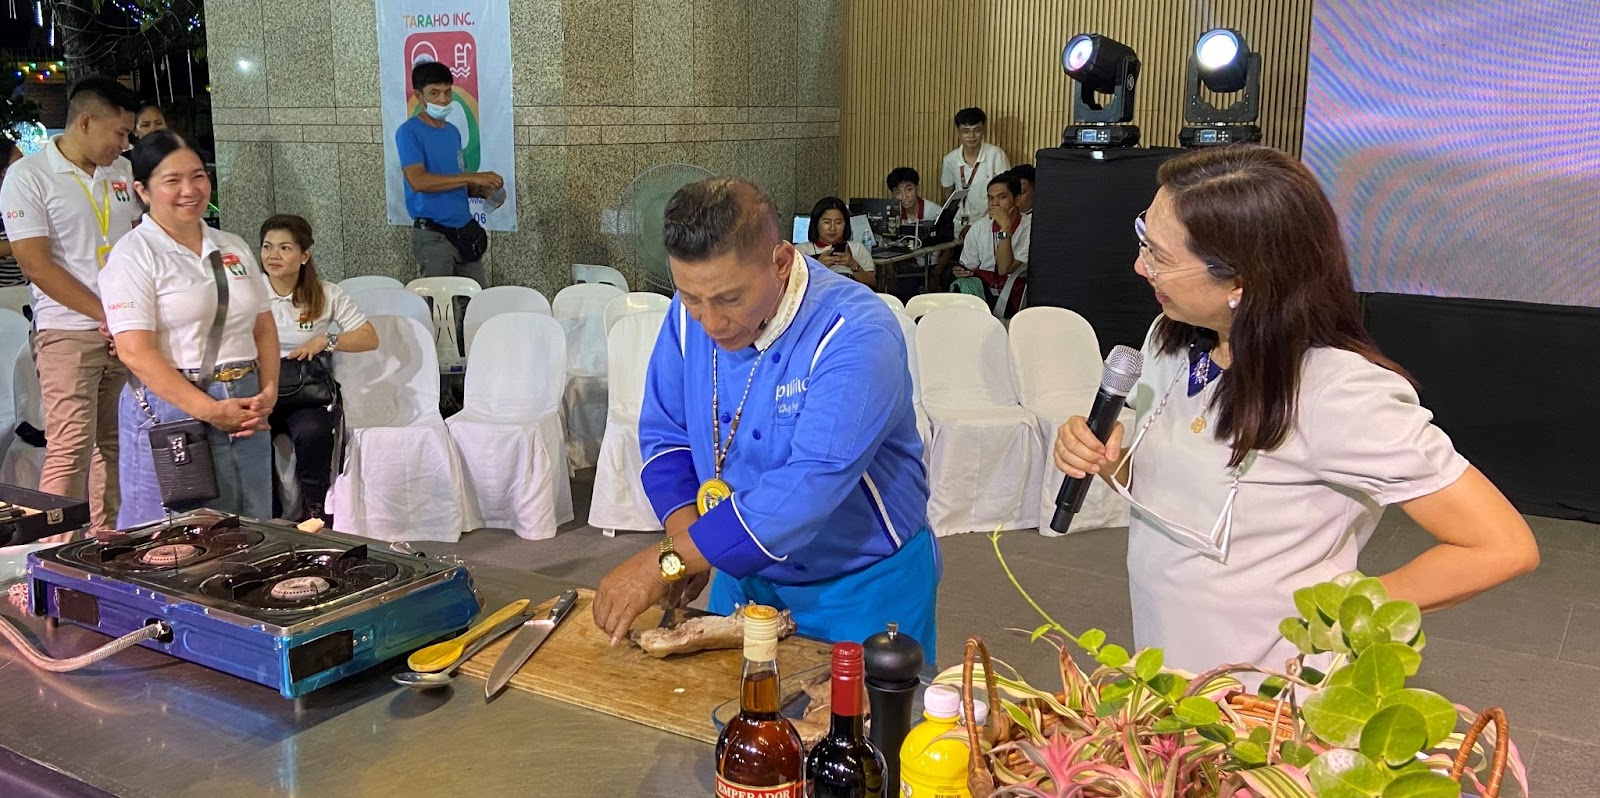 Tarlac City Mayor Cristy Angeles joined Chef Boy Logro (in blue) as he demonstrated three ways to cook rabbit meat.